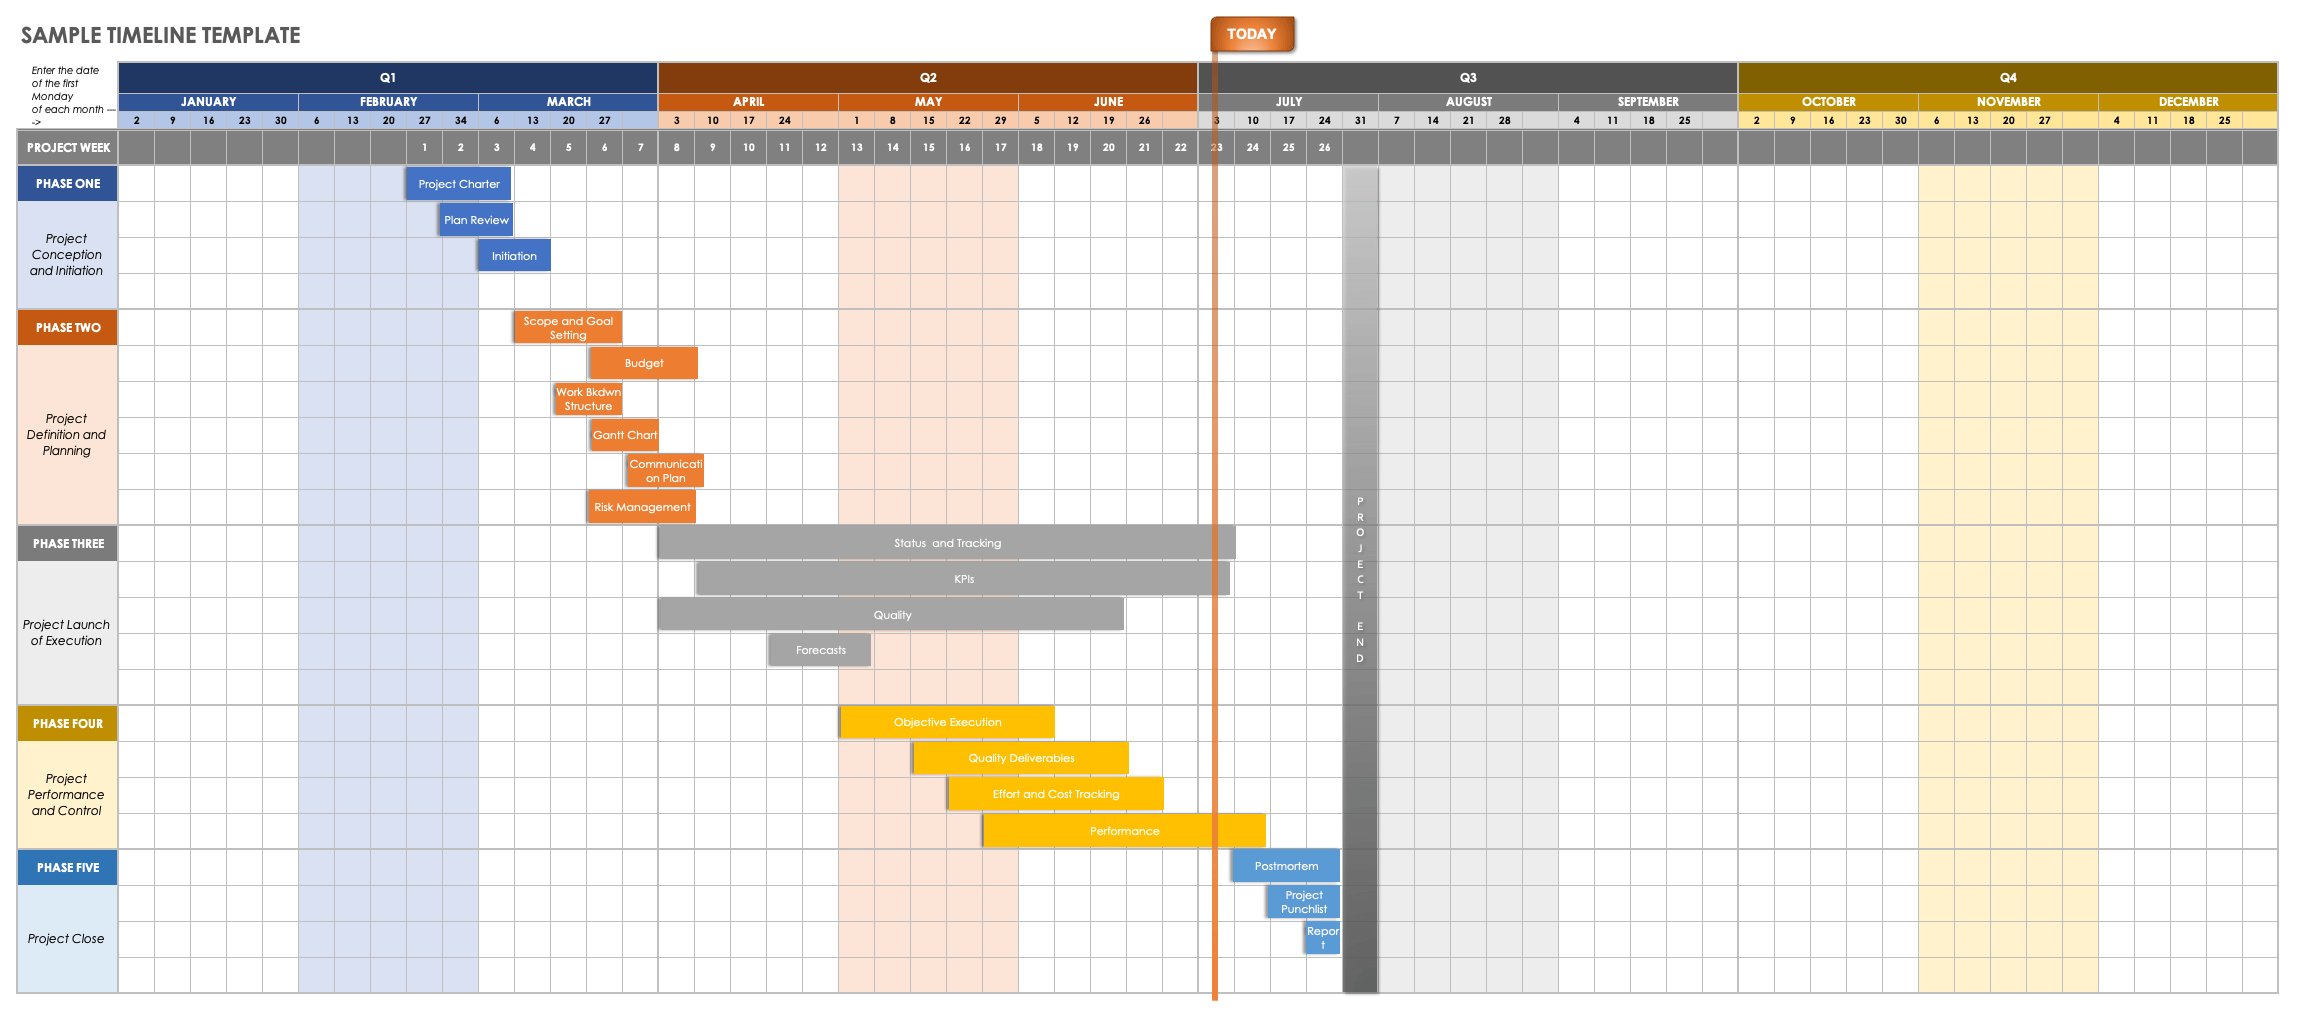 thesis timeline template excel